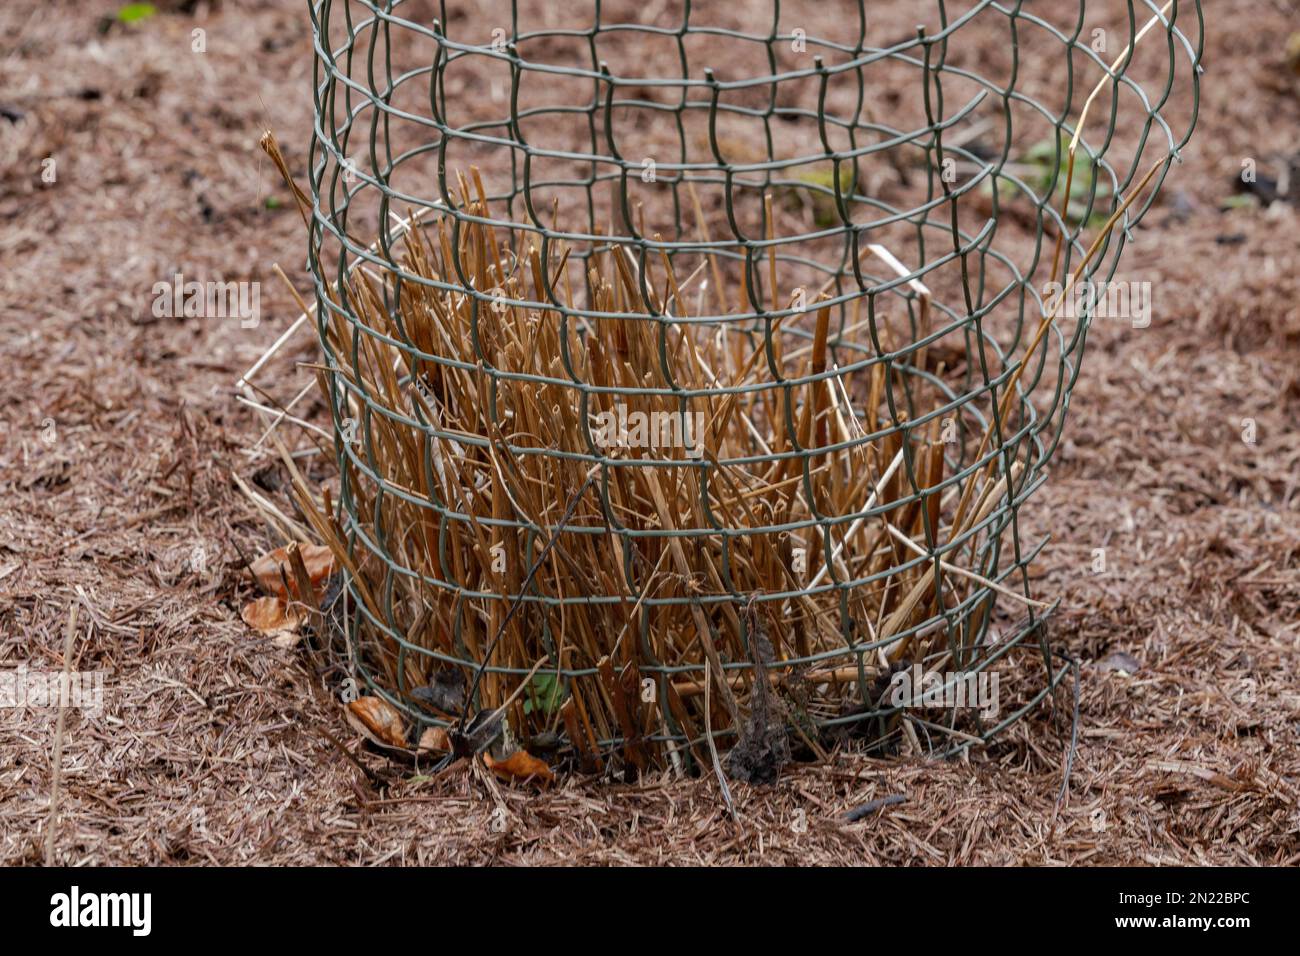 A shrub protected and supported by plastic netting. A straw mulch has been spread around the plant to enrich the soil and help weed control. Stock Photo